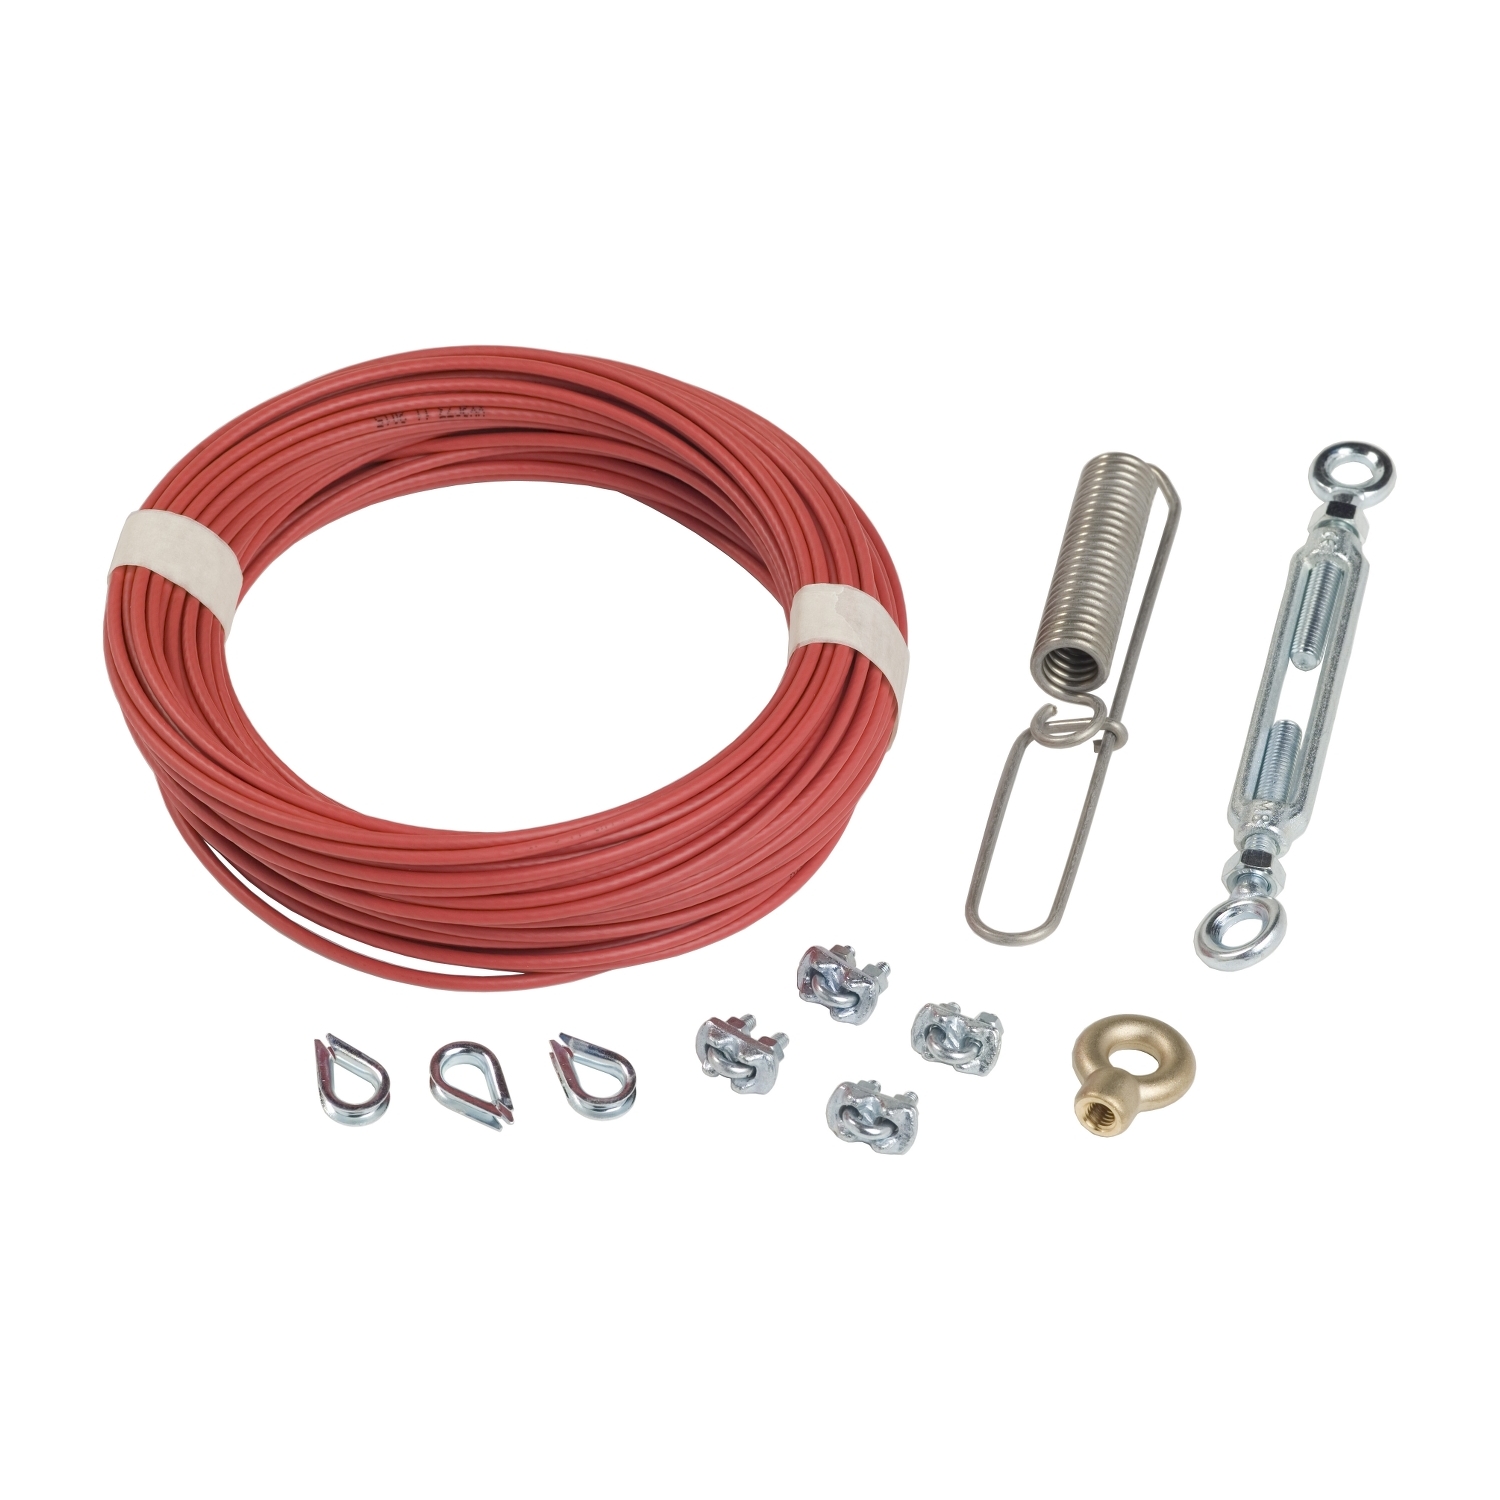 Telemecanique emergency stop rope pull switches XY2C, mounting kit, Ø 3.2 mm, L 25.5 m, for rope pull switch